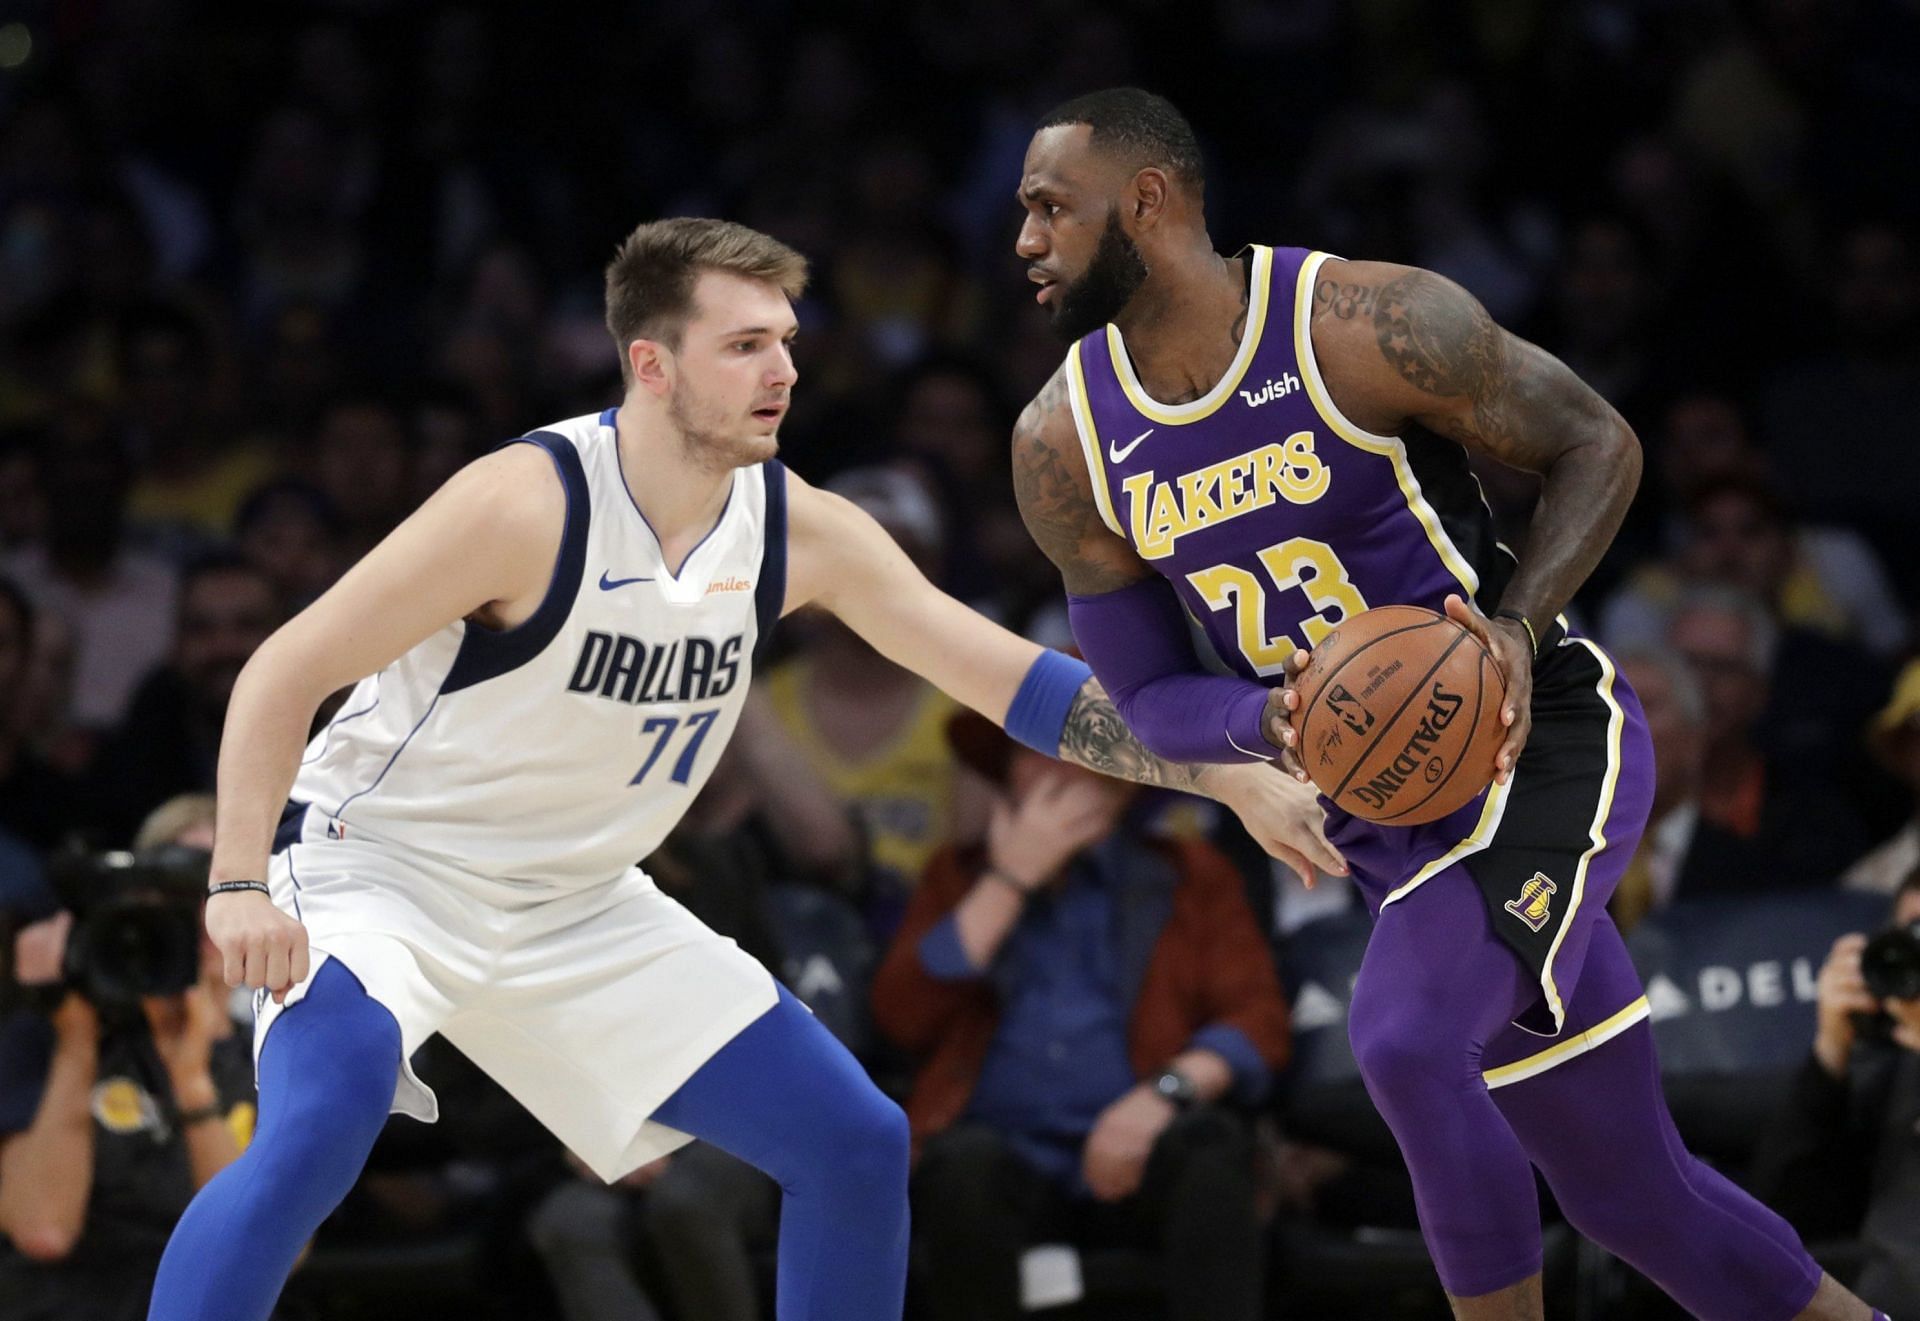 Luka Doncic has to have the will and motivation to be better on defense to achieve LeBron James-like greatness. [Photo: Bleacher Report]